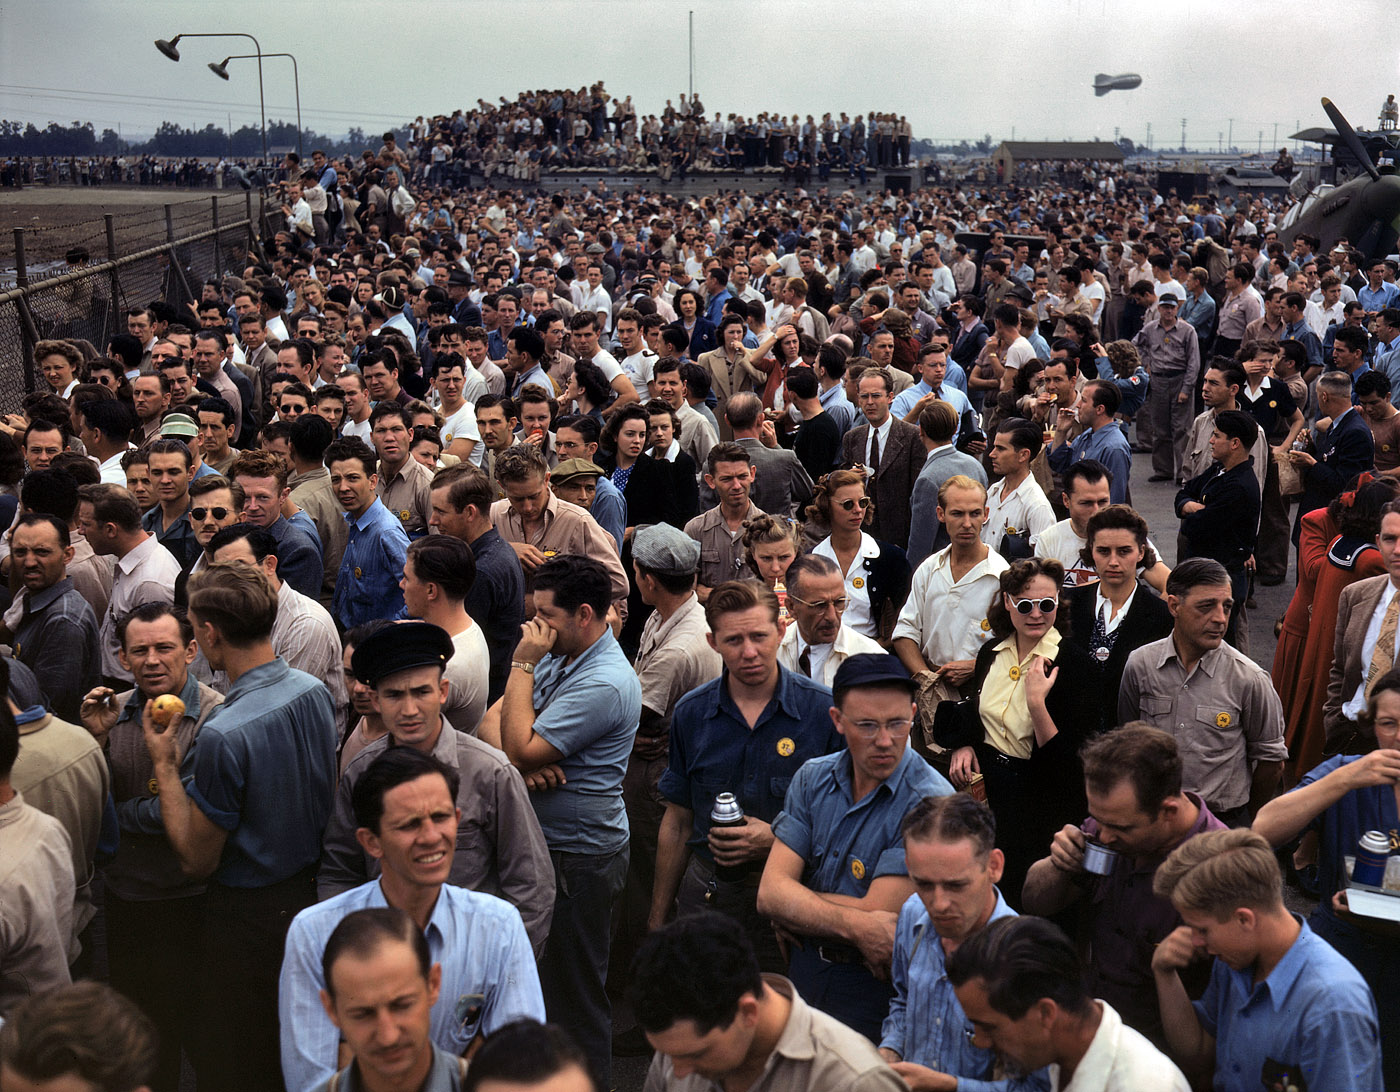 October 1942. "Thousands of North American Aviation employees at Inglewood, California, look skyward as the bomber and fighter planes they helped build perform overhead during a lunch period air show. This plant produces the battle-tested B-25 'Billy Mitchell' bomber, used in General Doolittle's raid on Tokyo, and the P-51 'Mustang' fighter plane, which was first brought into prominence by the British raid on Dieppe." View full size. 4x5 Kodachrome transparency by Alfred Palmer for the Office of War Information.